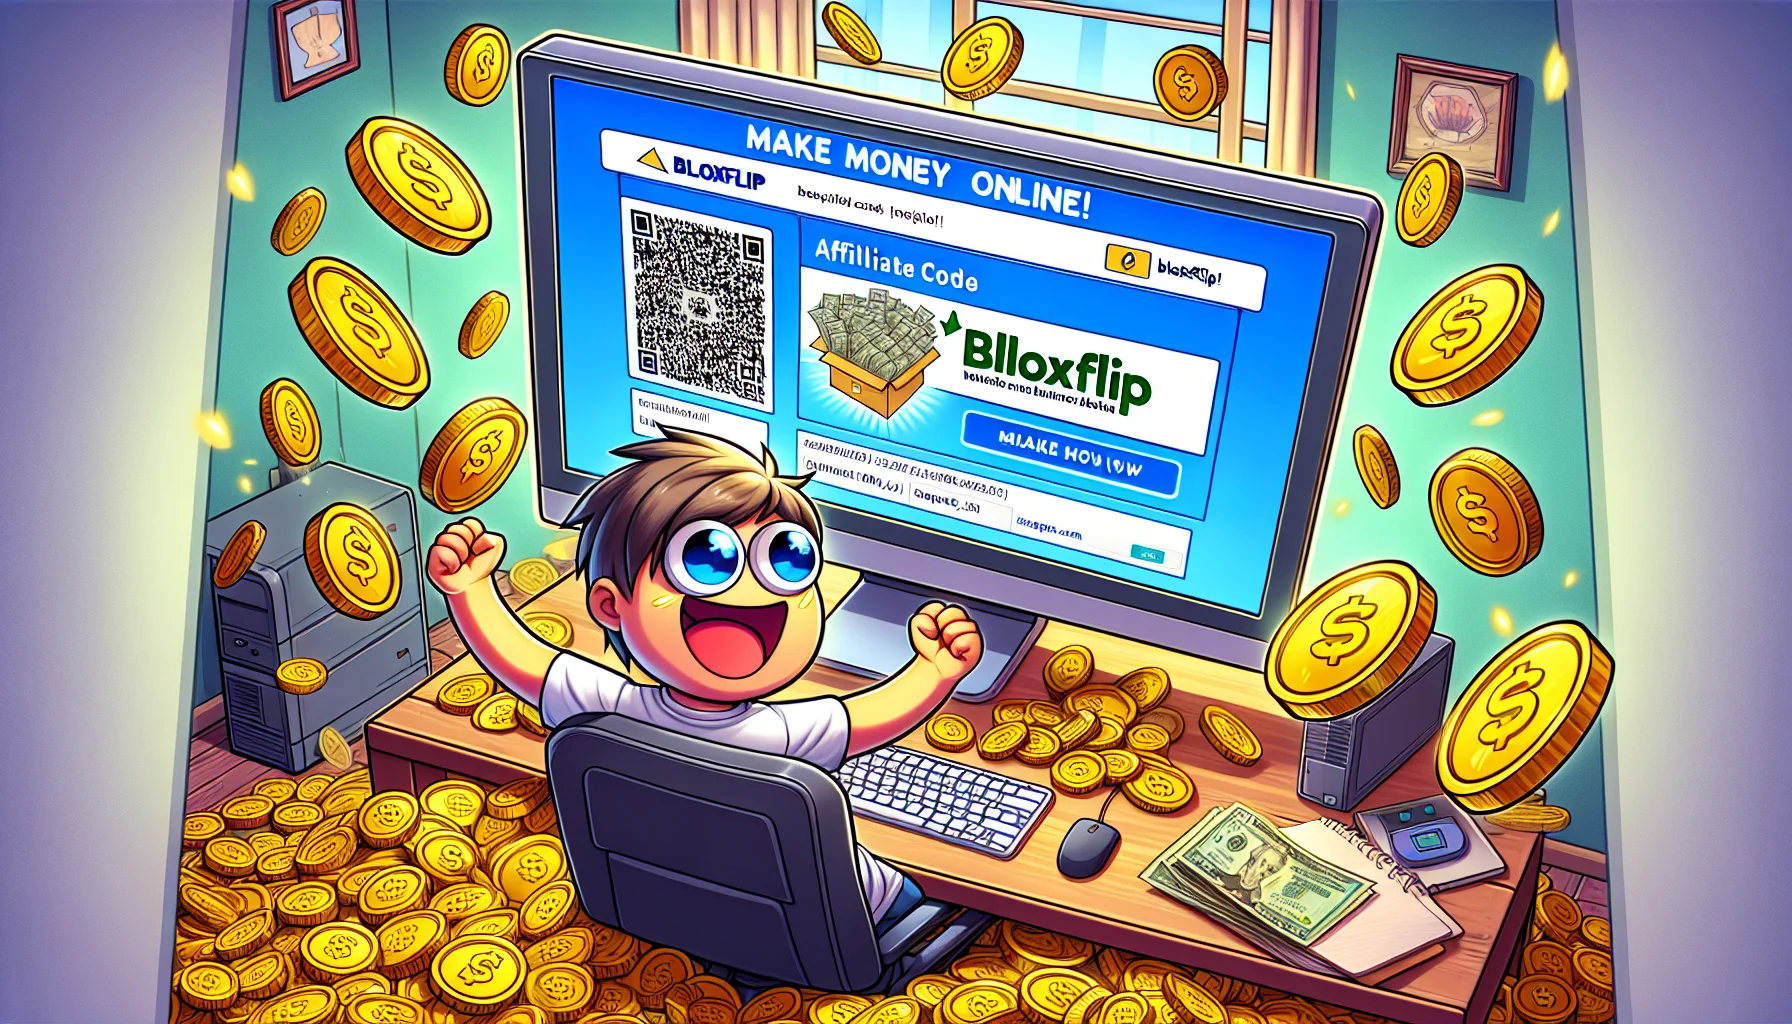 Generate an amusing, realistic image of a scene revolving around making money online. For context, center the image around an individual feeling excited as they discover multiple 'bloxflip' codes on their computer screen. Illustrate piles of virtual coins, indicating wealth, on the sides of the screen to signify the prospect of making online income. Create a setting suggestive of a home office, showing a desk with a computer and other everyday objects, thus grounding the image in reality. Make sure the affiliate codes are prominently displayed on the computer.